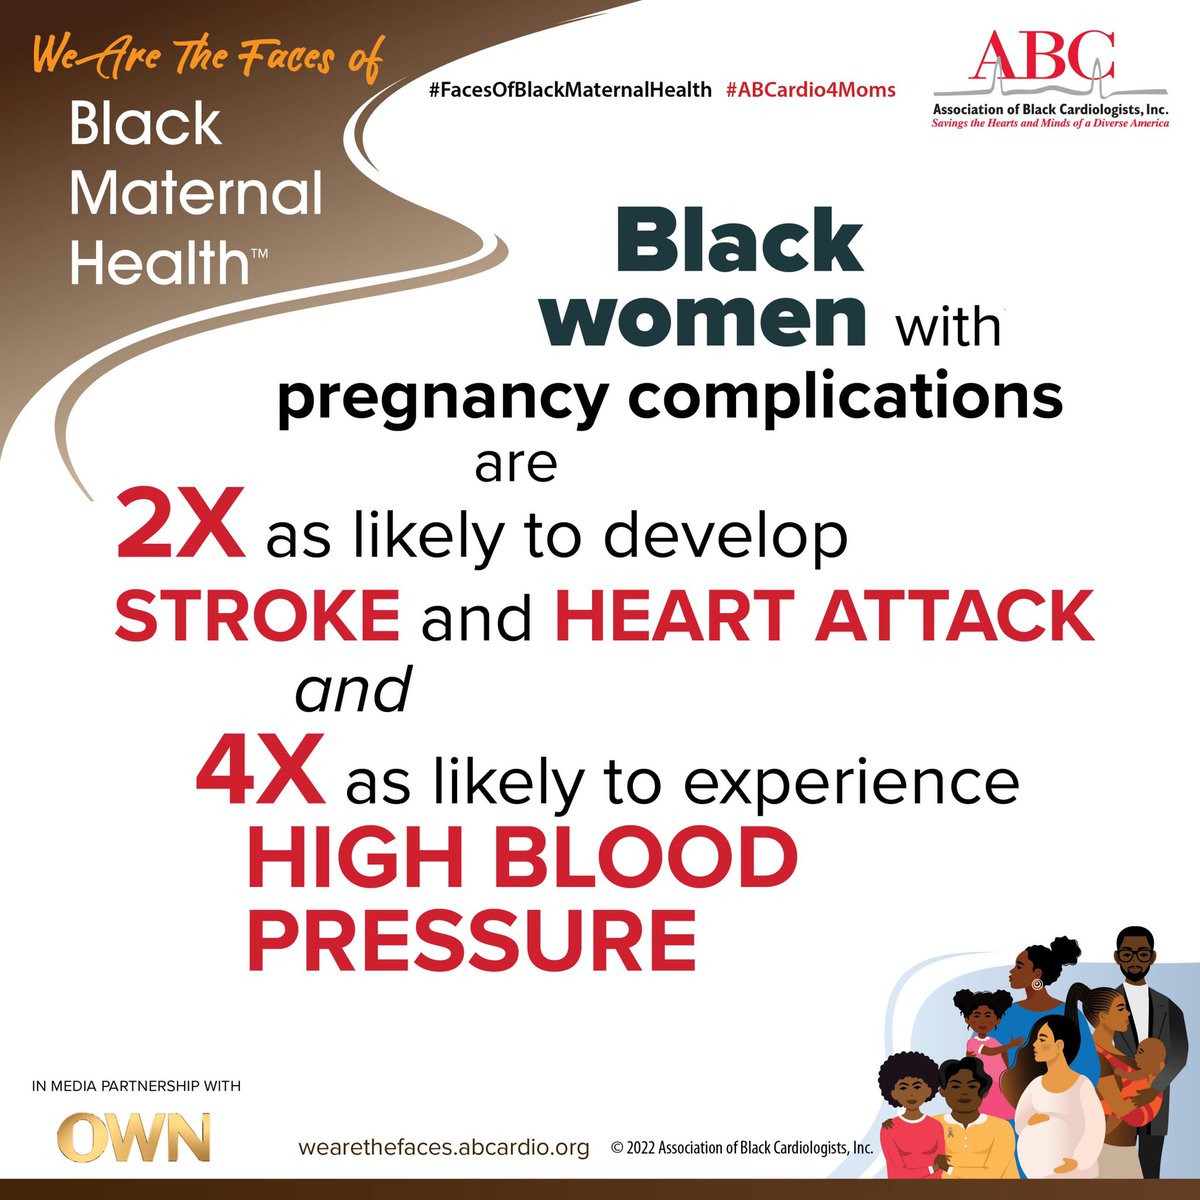 We are the Faces of Black Maternal Health™ is the @ABCardio1 national awareness campaign to expand awareness about Black maternal health. Check out the social media tool-kit by visiting: wearethefaces.abcardio.org/social-media-t…

#FacesofBlackMaternalHealth #ABCCardio4Moms #OurHearts #BMHW22